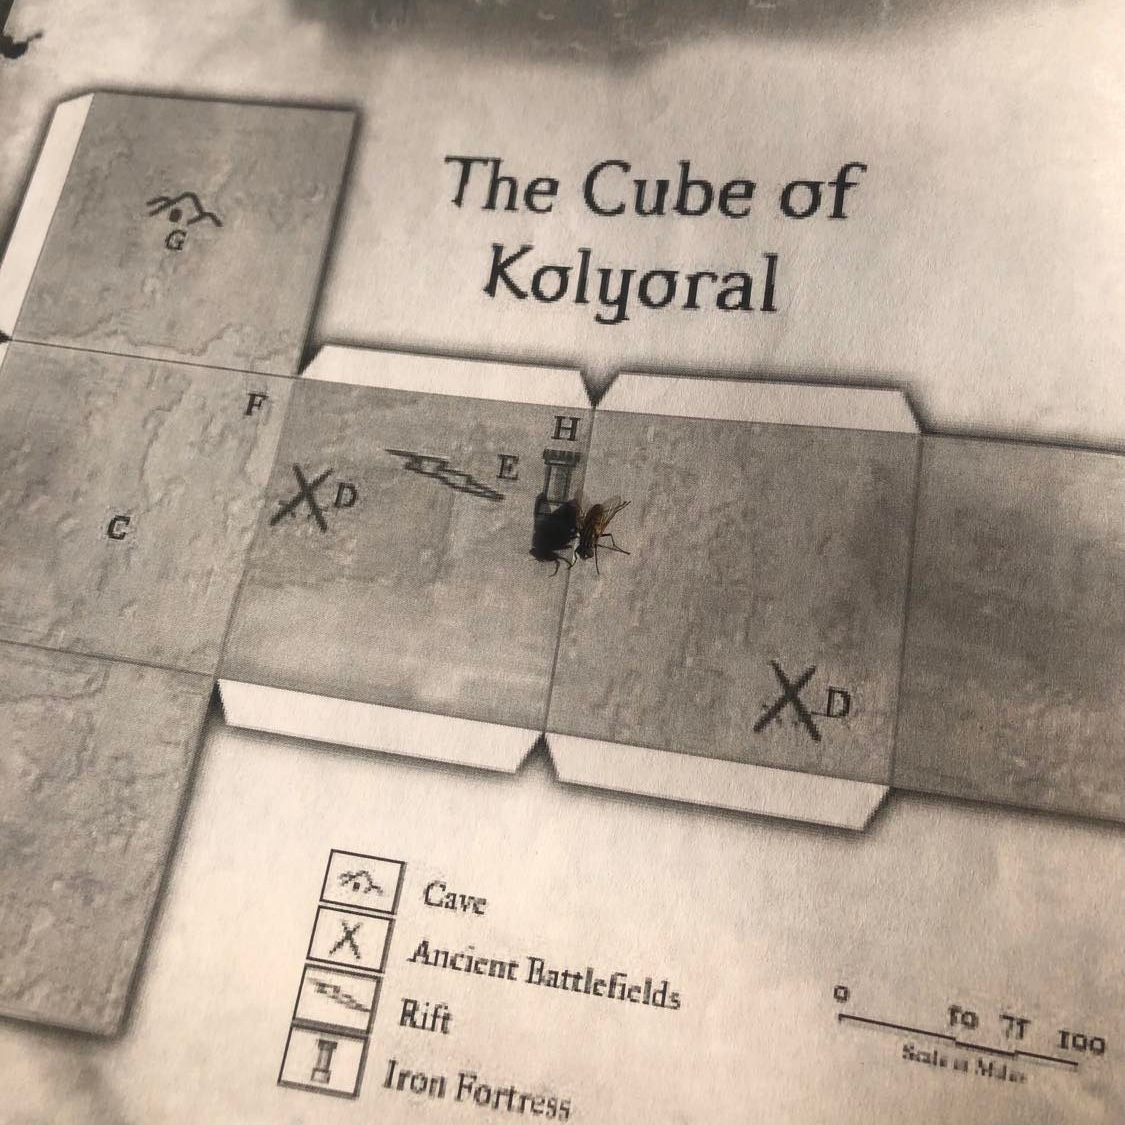 A clip of the map from the book, with a fly seemingly guarding the iron fortress on it.